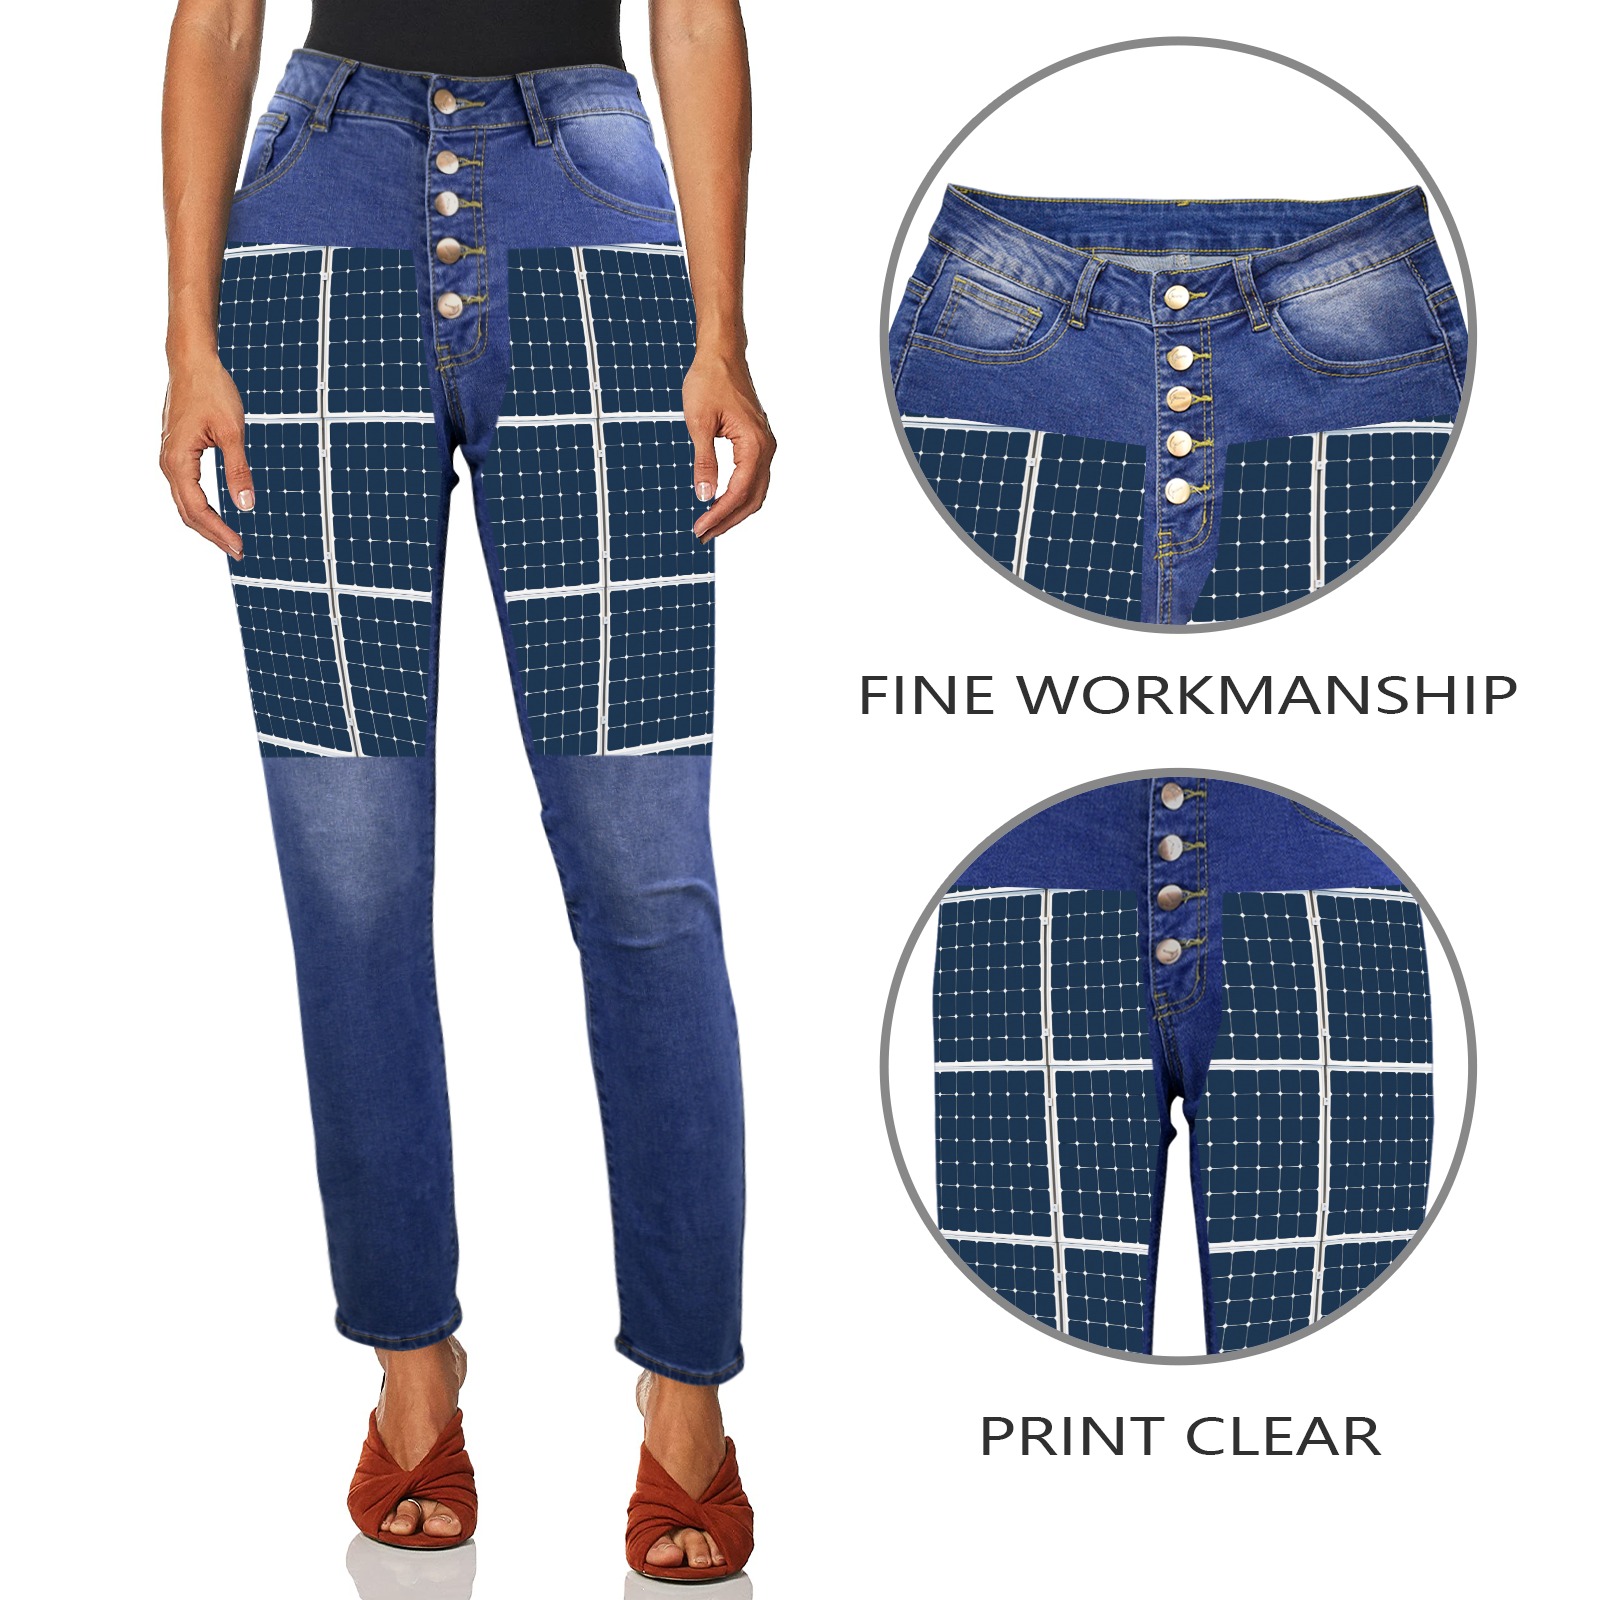 Solar Technology Power Panel Image Photovoltaic Women's Jeans (Front Printing)